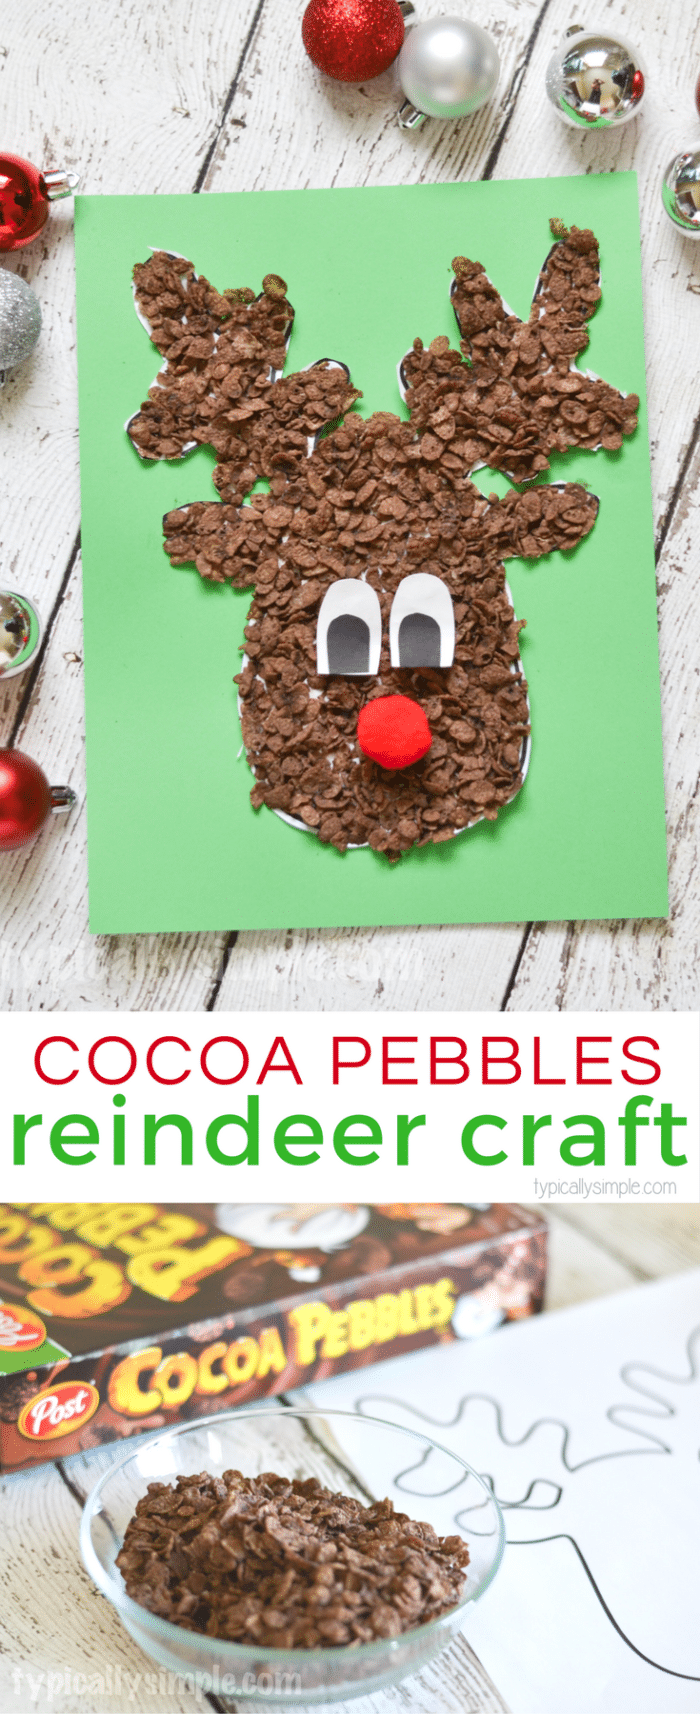 Using Cocoa Pebbles, create this super cute reindeer craft with the kids for Christmas!